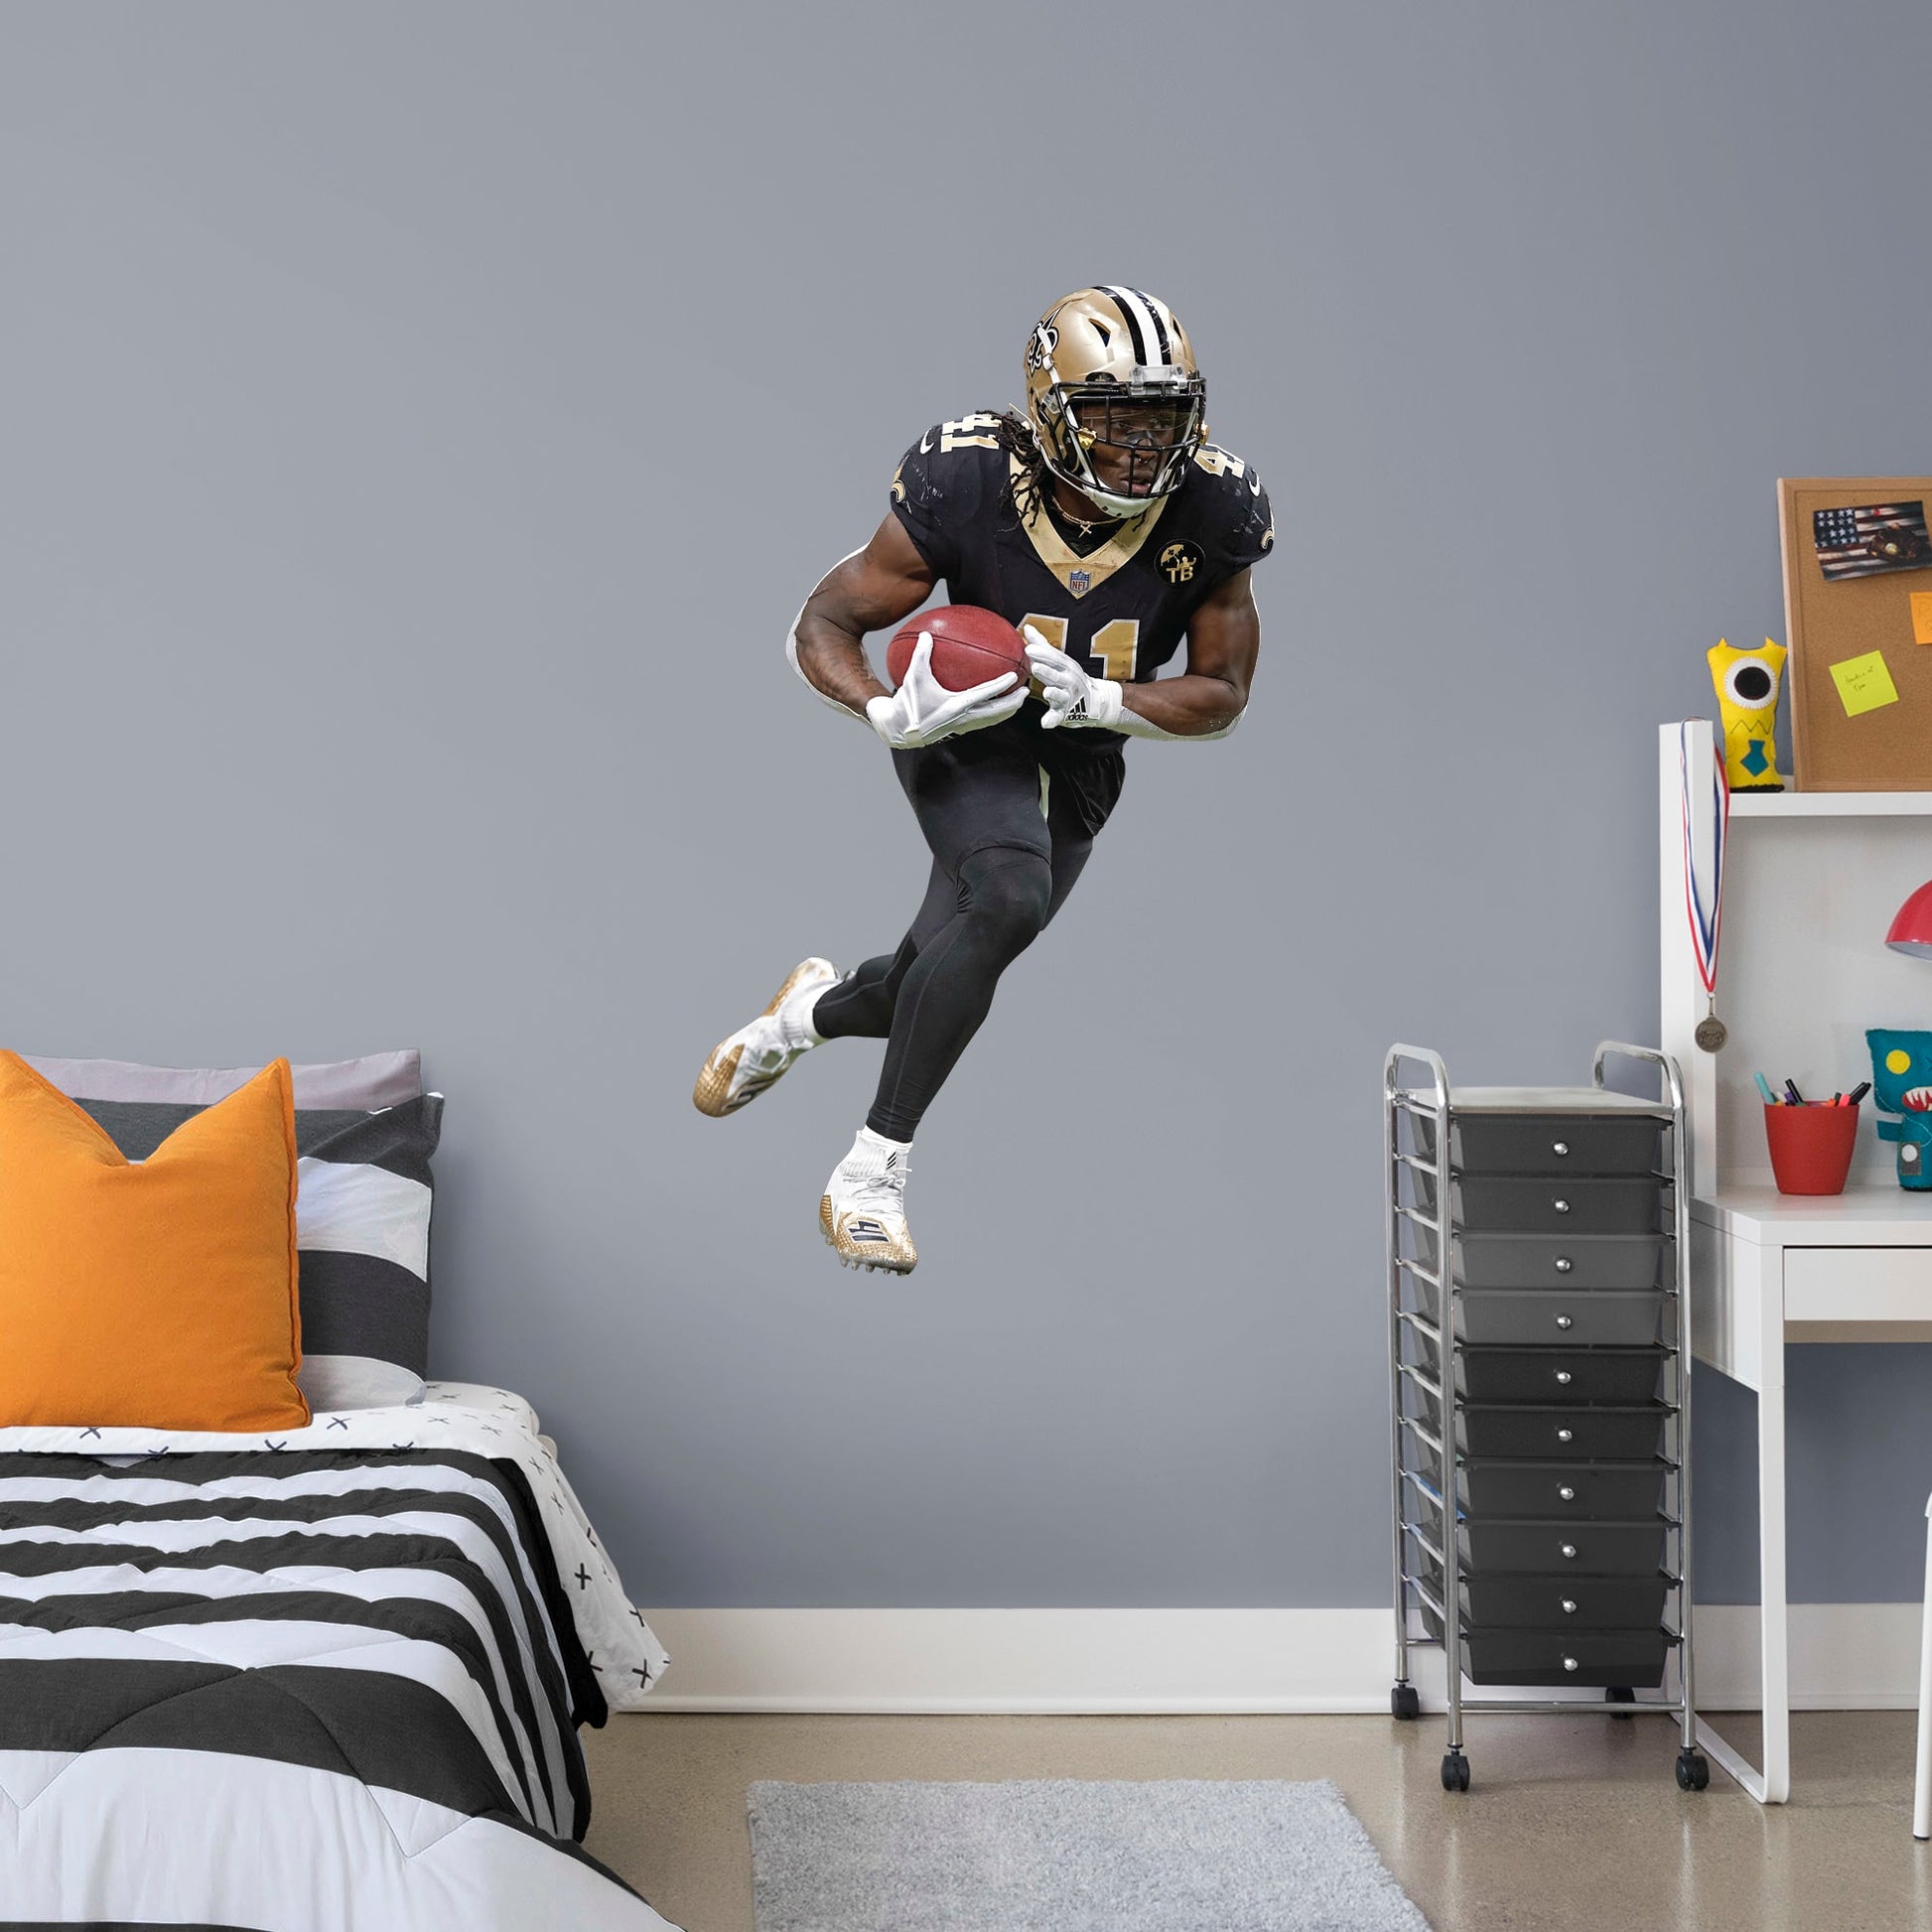 Life-Size Athlete + 10 Decals (43"W x 74"H) Who Dat! Running back Alvin Kamara of the New Orleans Saints had a stellar start to his NFL career with an impressive 32 TDs in his first two seasons - an MVP in the making. Deck your walls in black and gold with a high-grade vinyl decal of the Saints' #41. It won't fade or tear, so remove it and reuse it wherever you watch the big game. Geaux Saints!